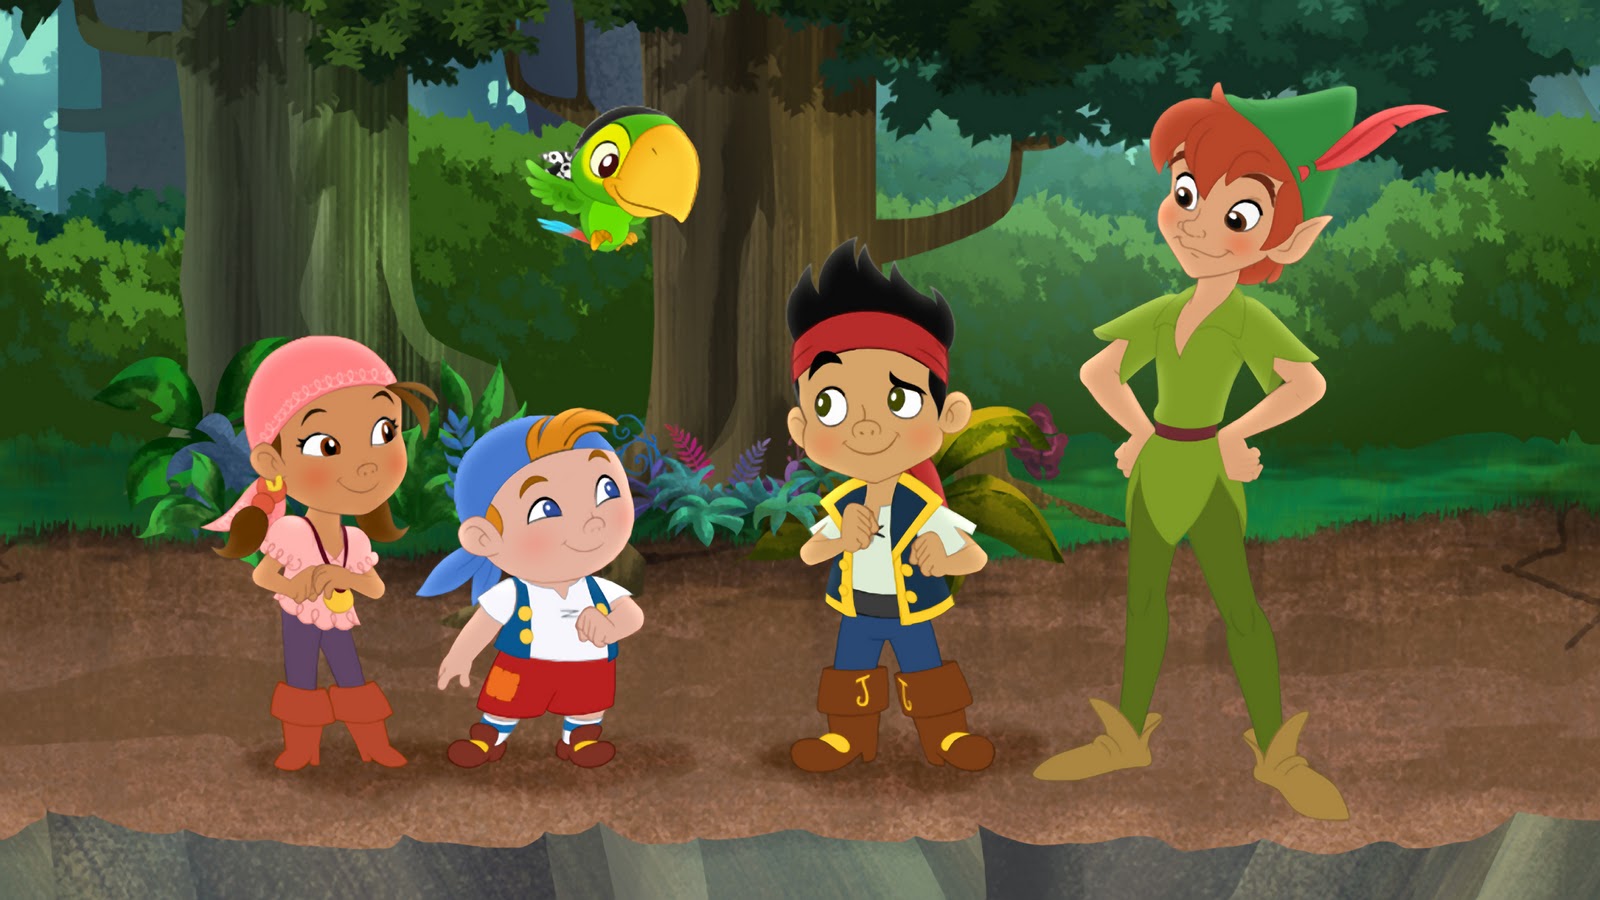 "Jake and the Never Land Pirates Peter Pan Returns" Image courtesy of Disney Junior